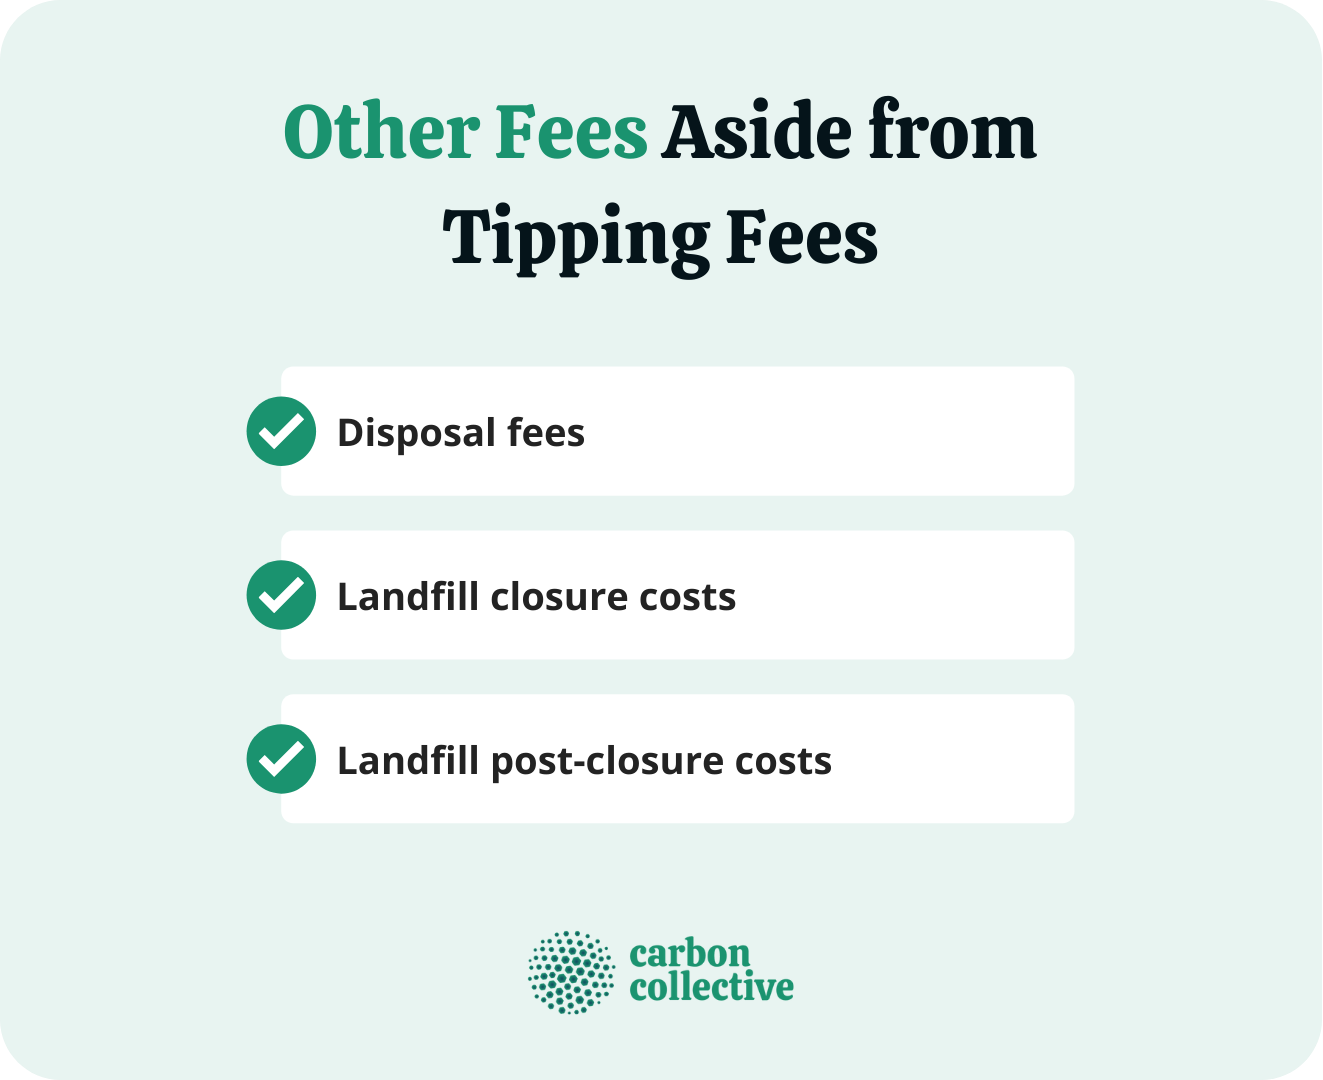 Other_Fees_Aside_from_Tipping_Fees